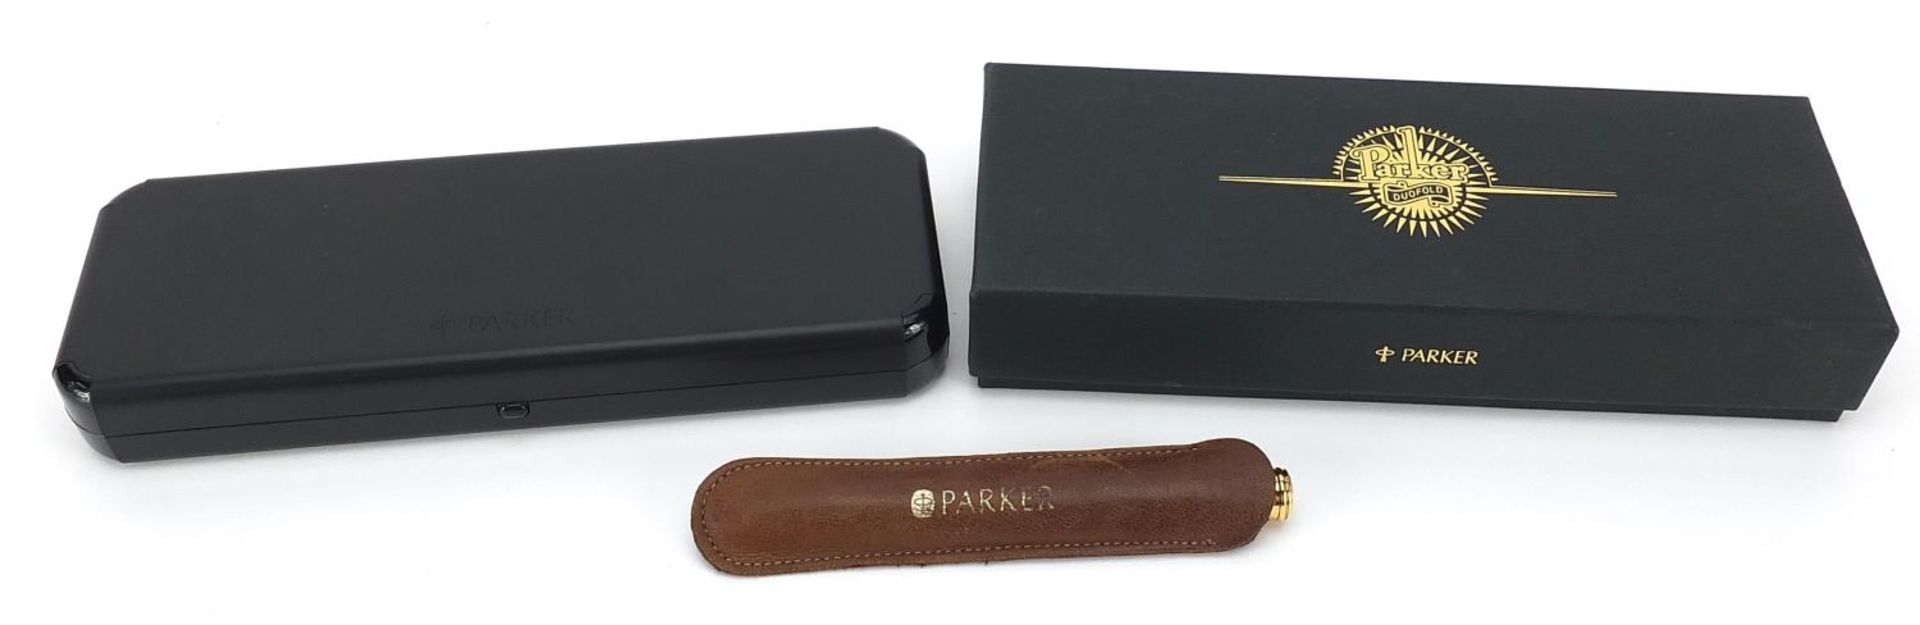 Parker Duofold red marbleised propelling pencil with case and a gold plated bark design fountain pen - Image 6 of 6